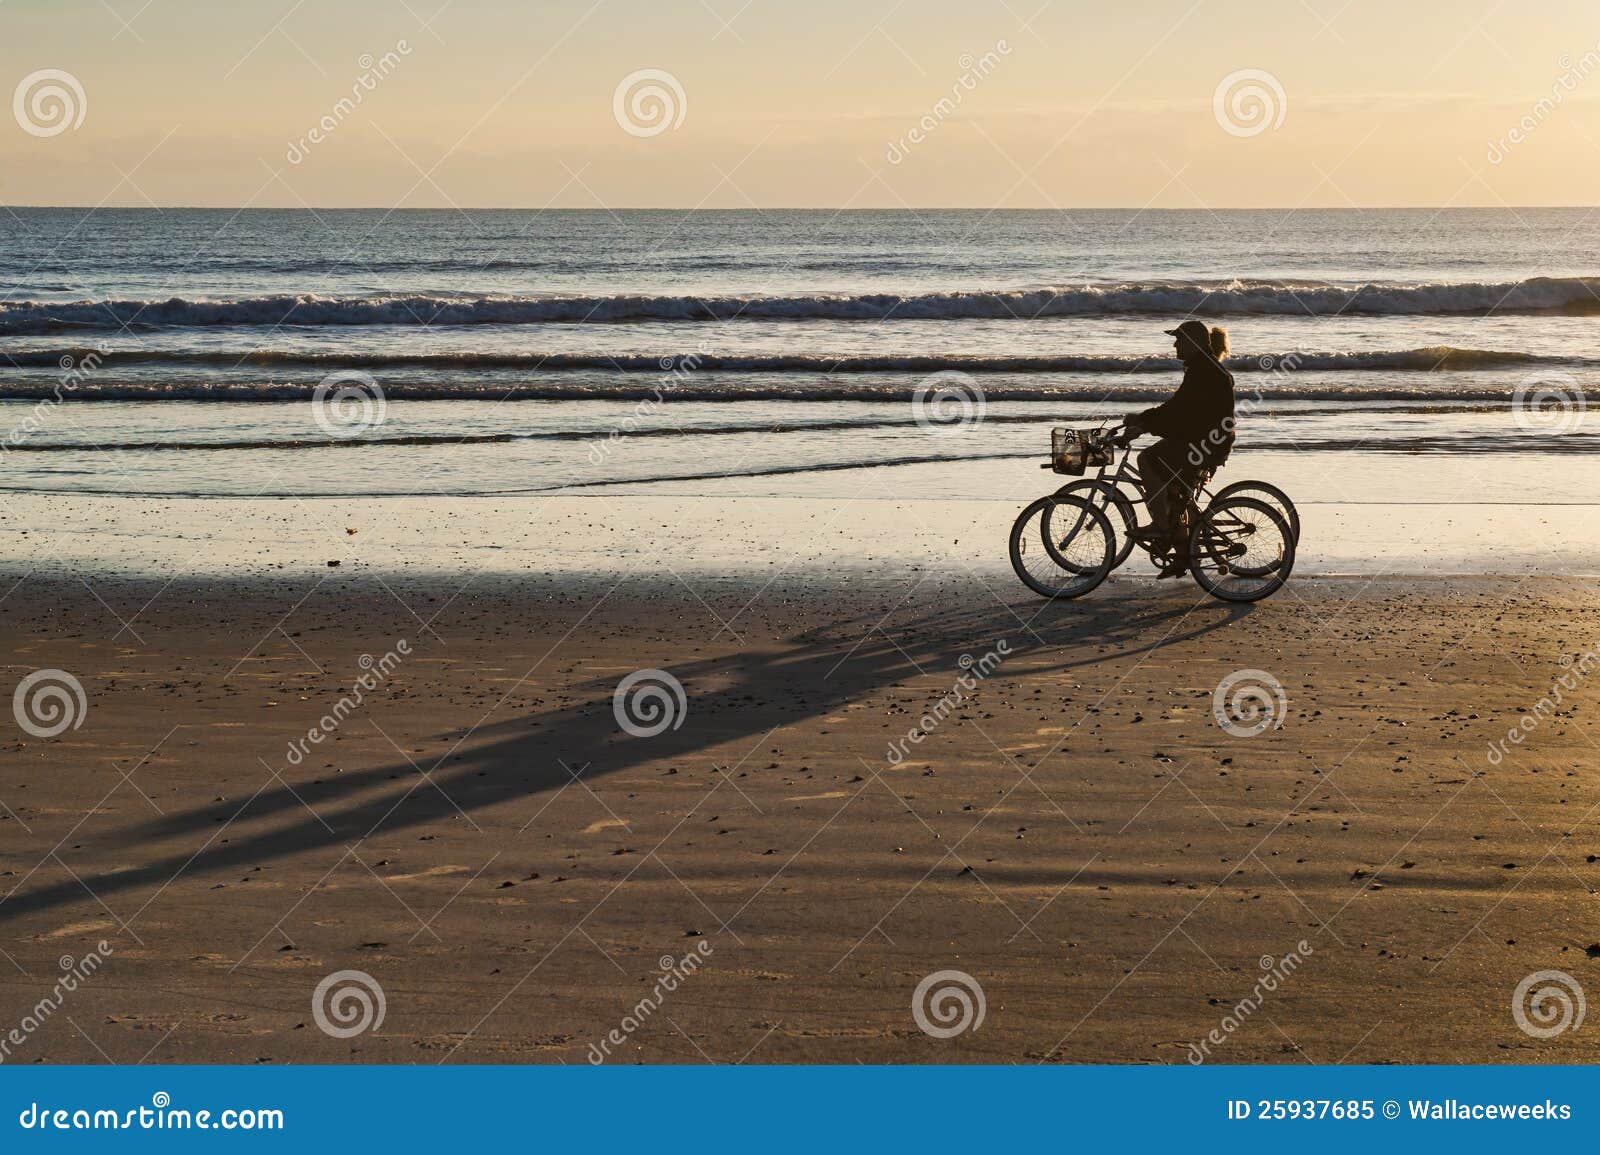 Bicycle Ride at Sunrise on Cocoa Beach Stock Image - Image of ocean ...